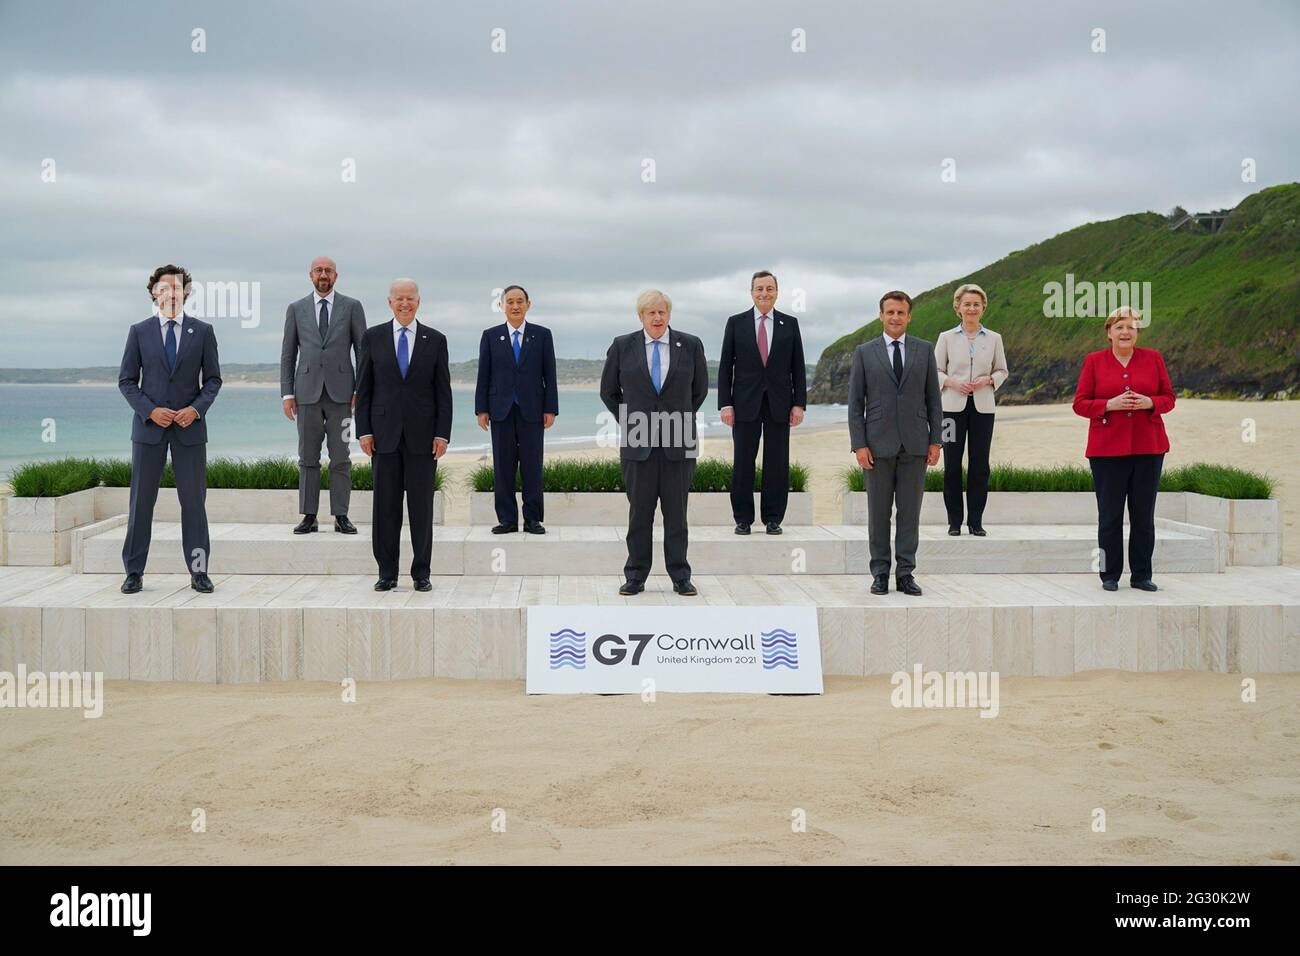 British Prime Minister Boris Johnson, center, poses with leaders of the G7 Summit during the family photo at the Carbis Bay Hotel, June 11, 2021 in Carbis Bay, Cornwall, United Kingdom. Standing from left to right are: Canadian Prime Minister Justin Trudeau, European Council President Charles Michel, U.S President Joe Biden, Japanese Prime Minister Yoshihide Suga, British Prime Minister Boris Johnson, Italian Prime Minister Mario Draghi, French President Emmanuel Macron, European Commission President Ursula von der Leyen and German Chancellor Angela Merkel. Stock Photo